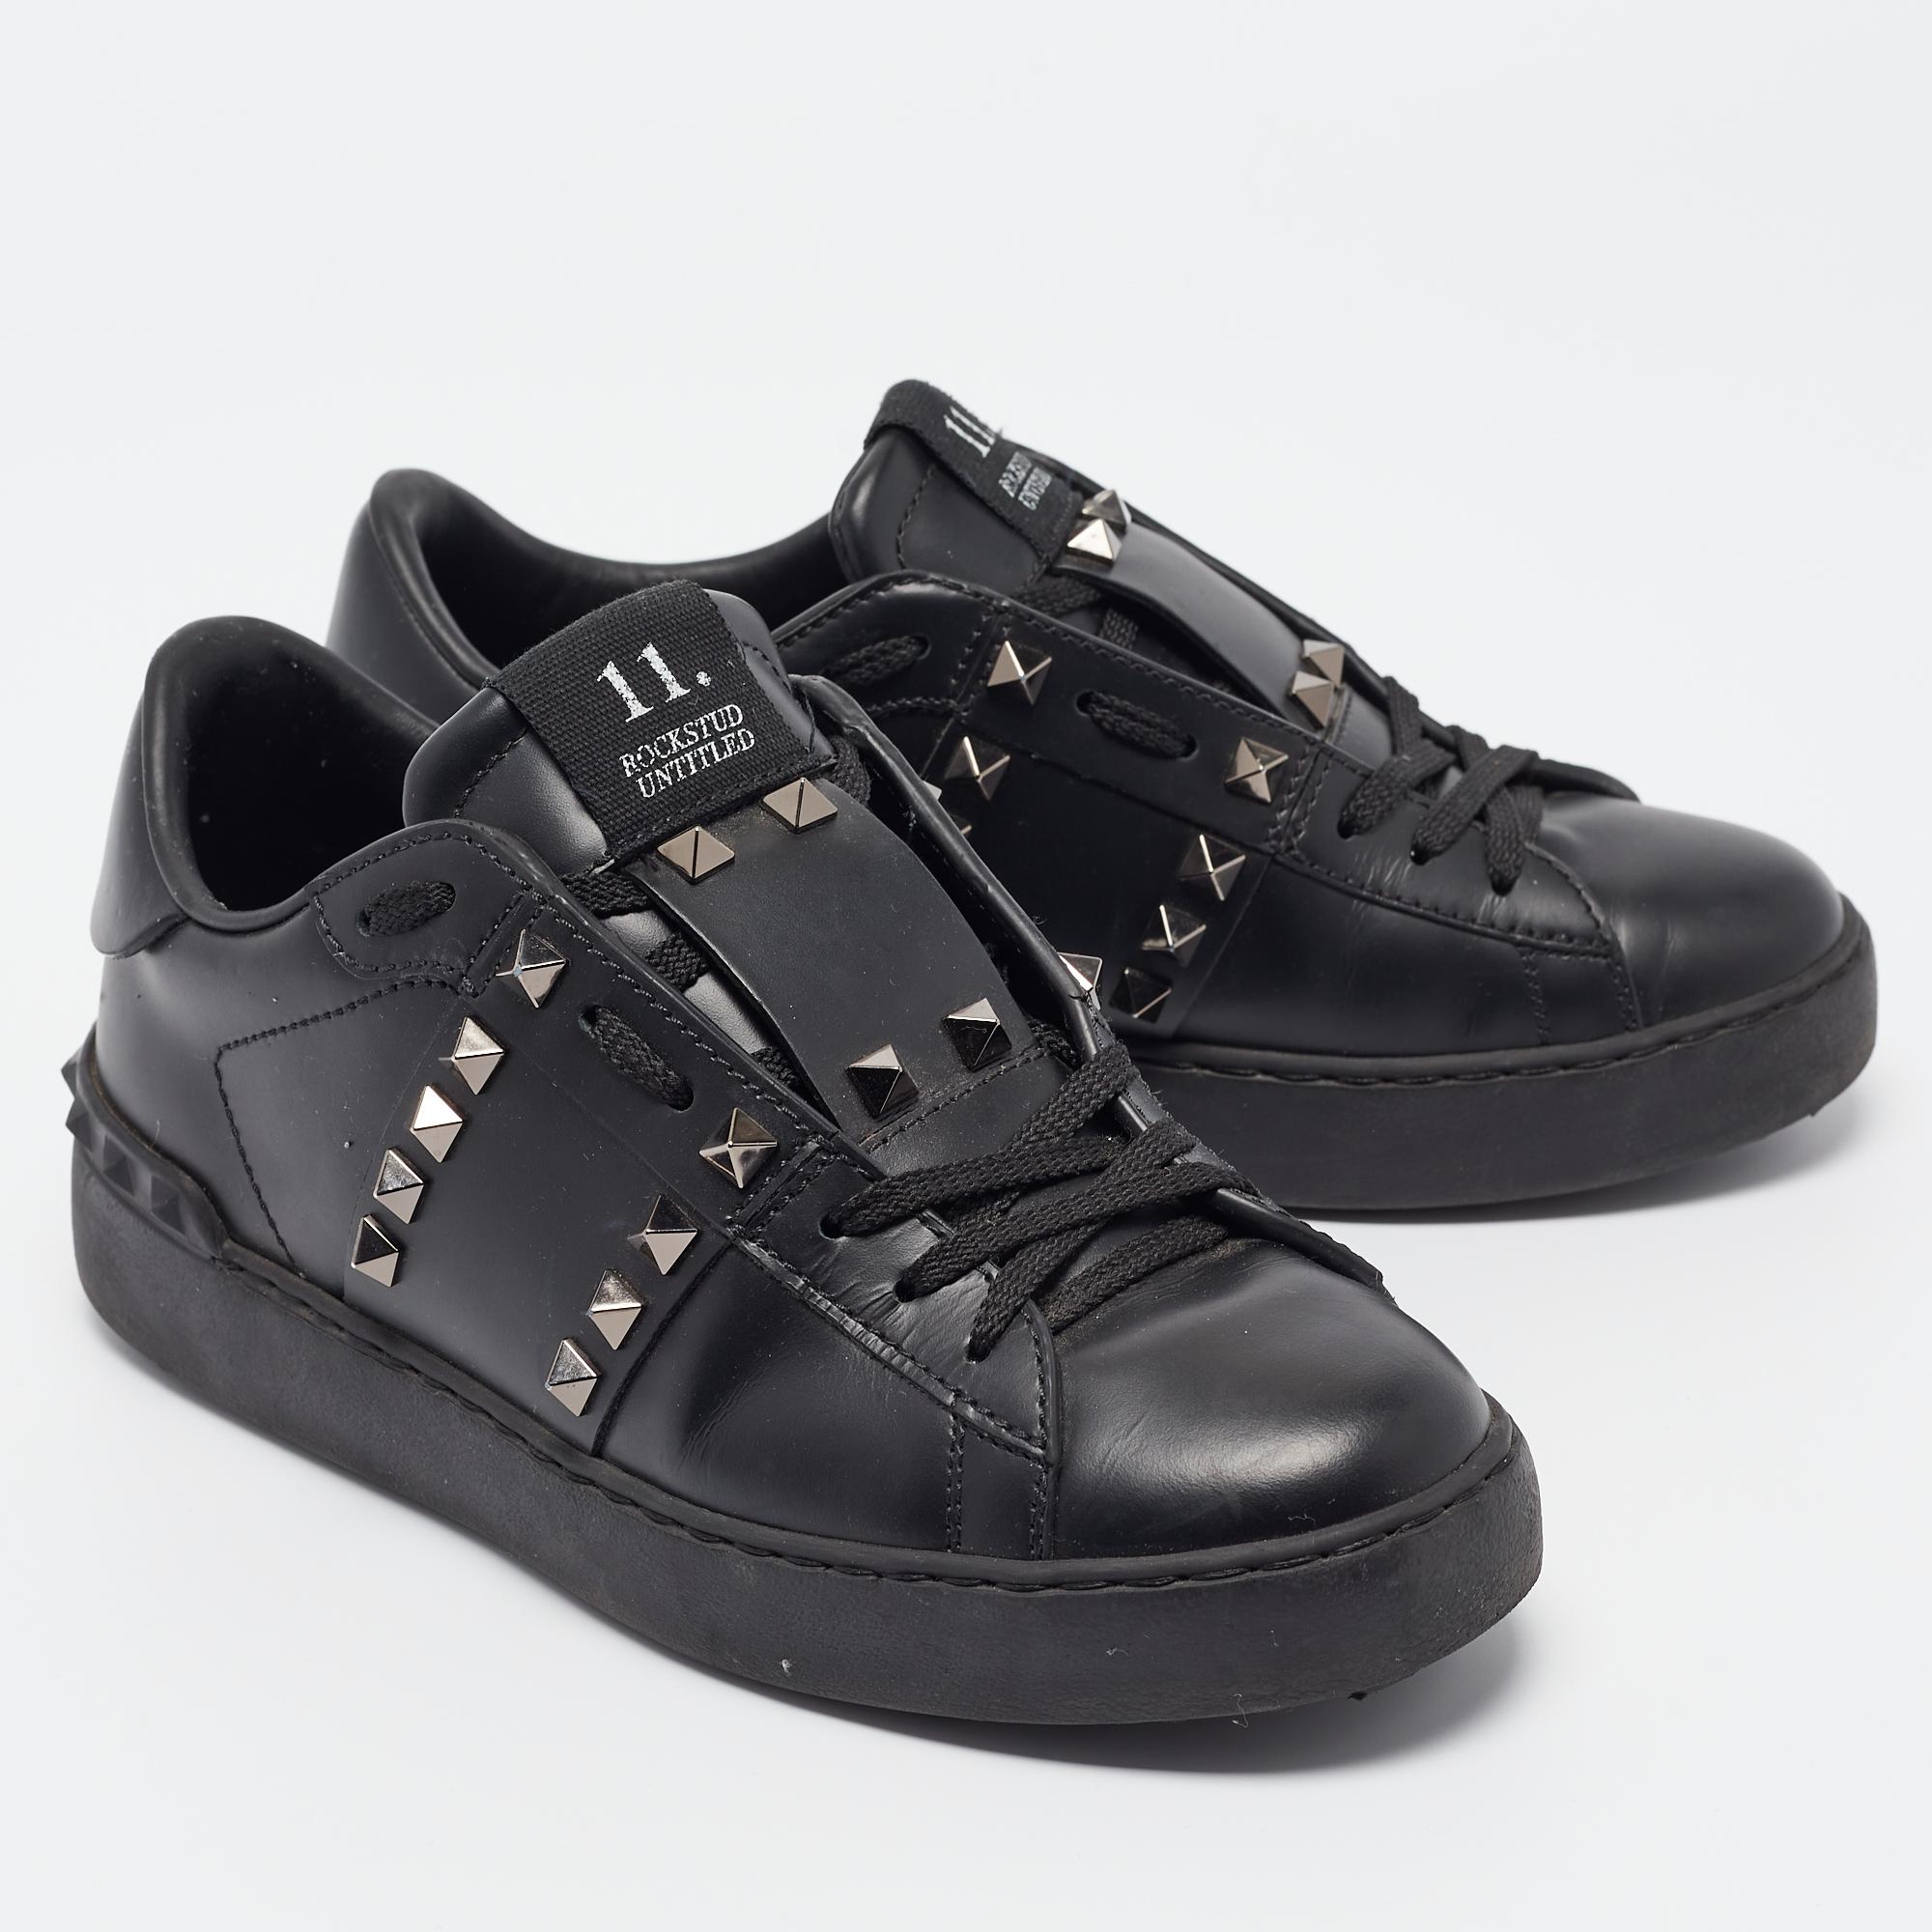 Valentino Black Leather Rockstud Low Top Sneakers Size 36.5 For Sale 1